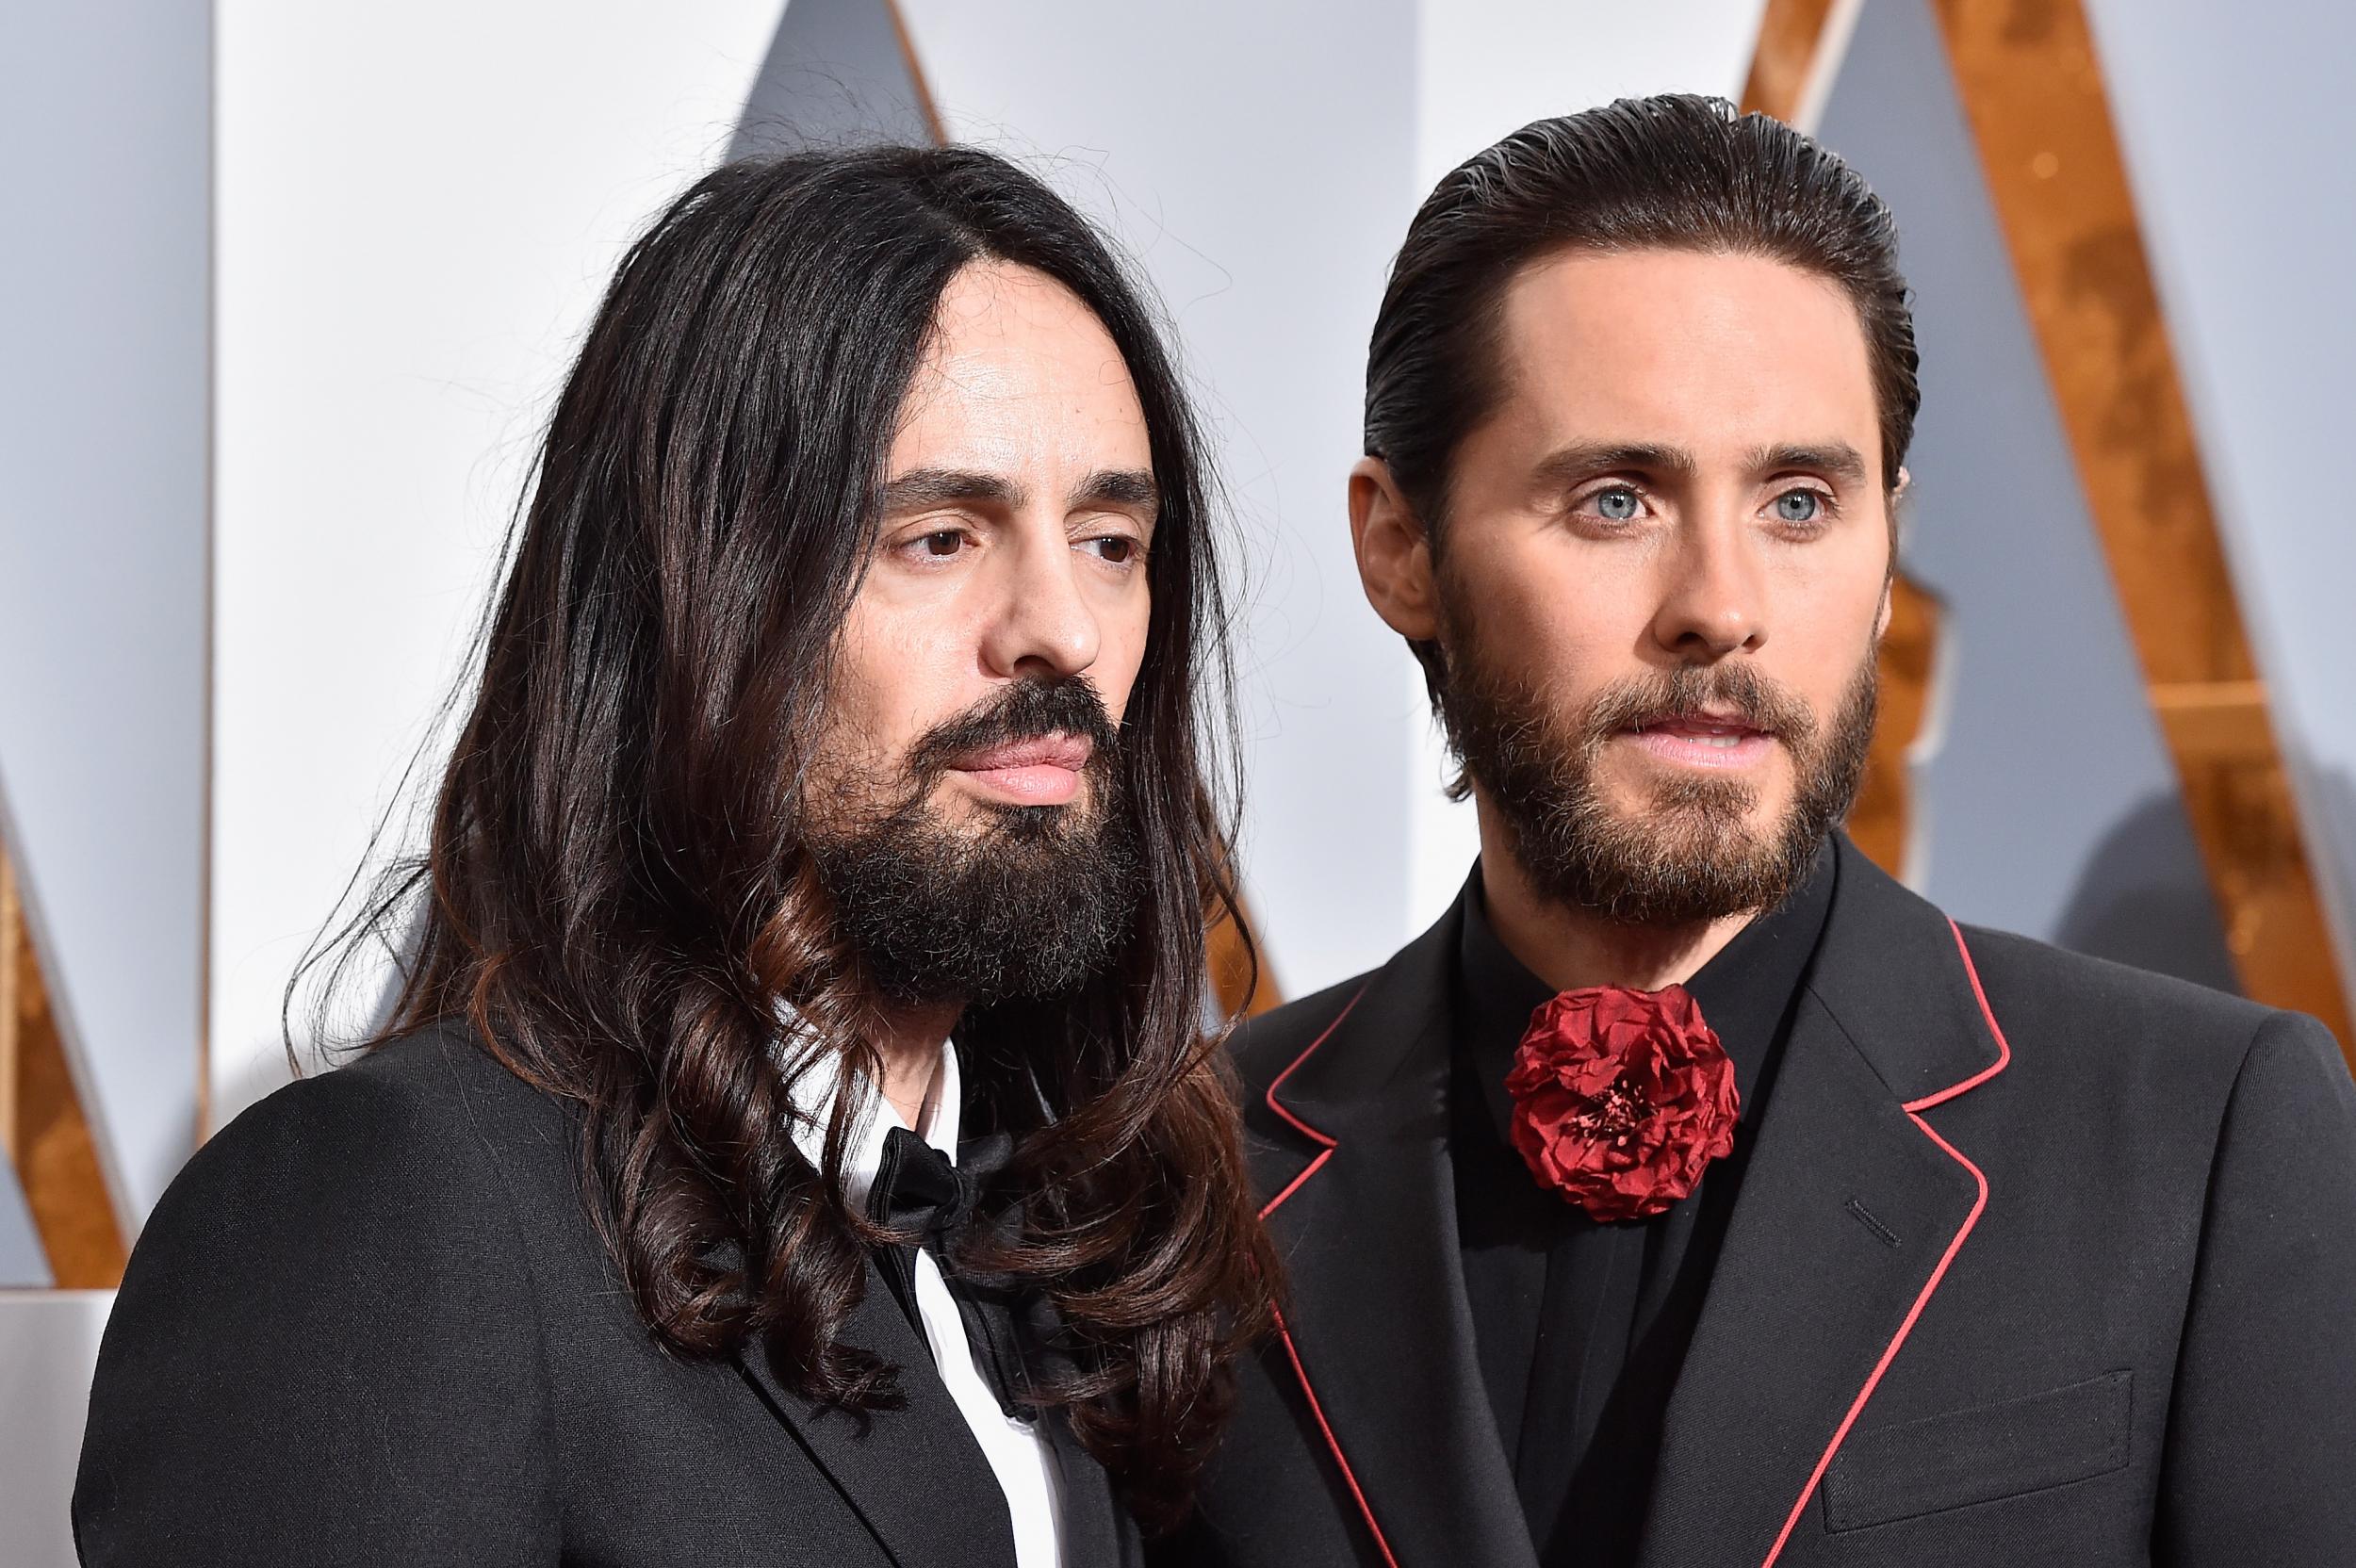 Gucci's Alessandro Michele and Jared Leto at the Oscars 2016.